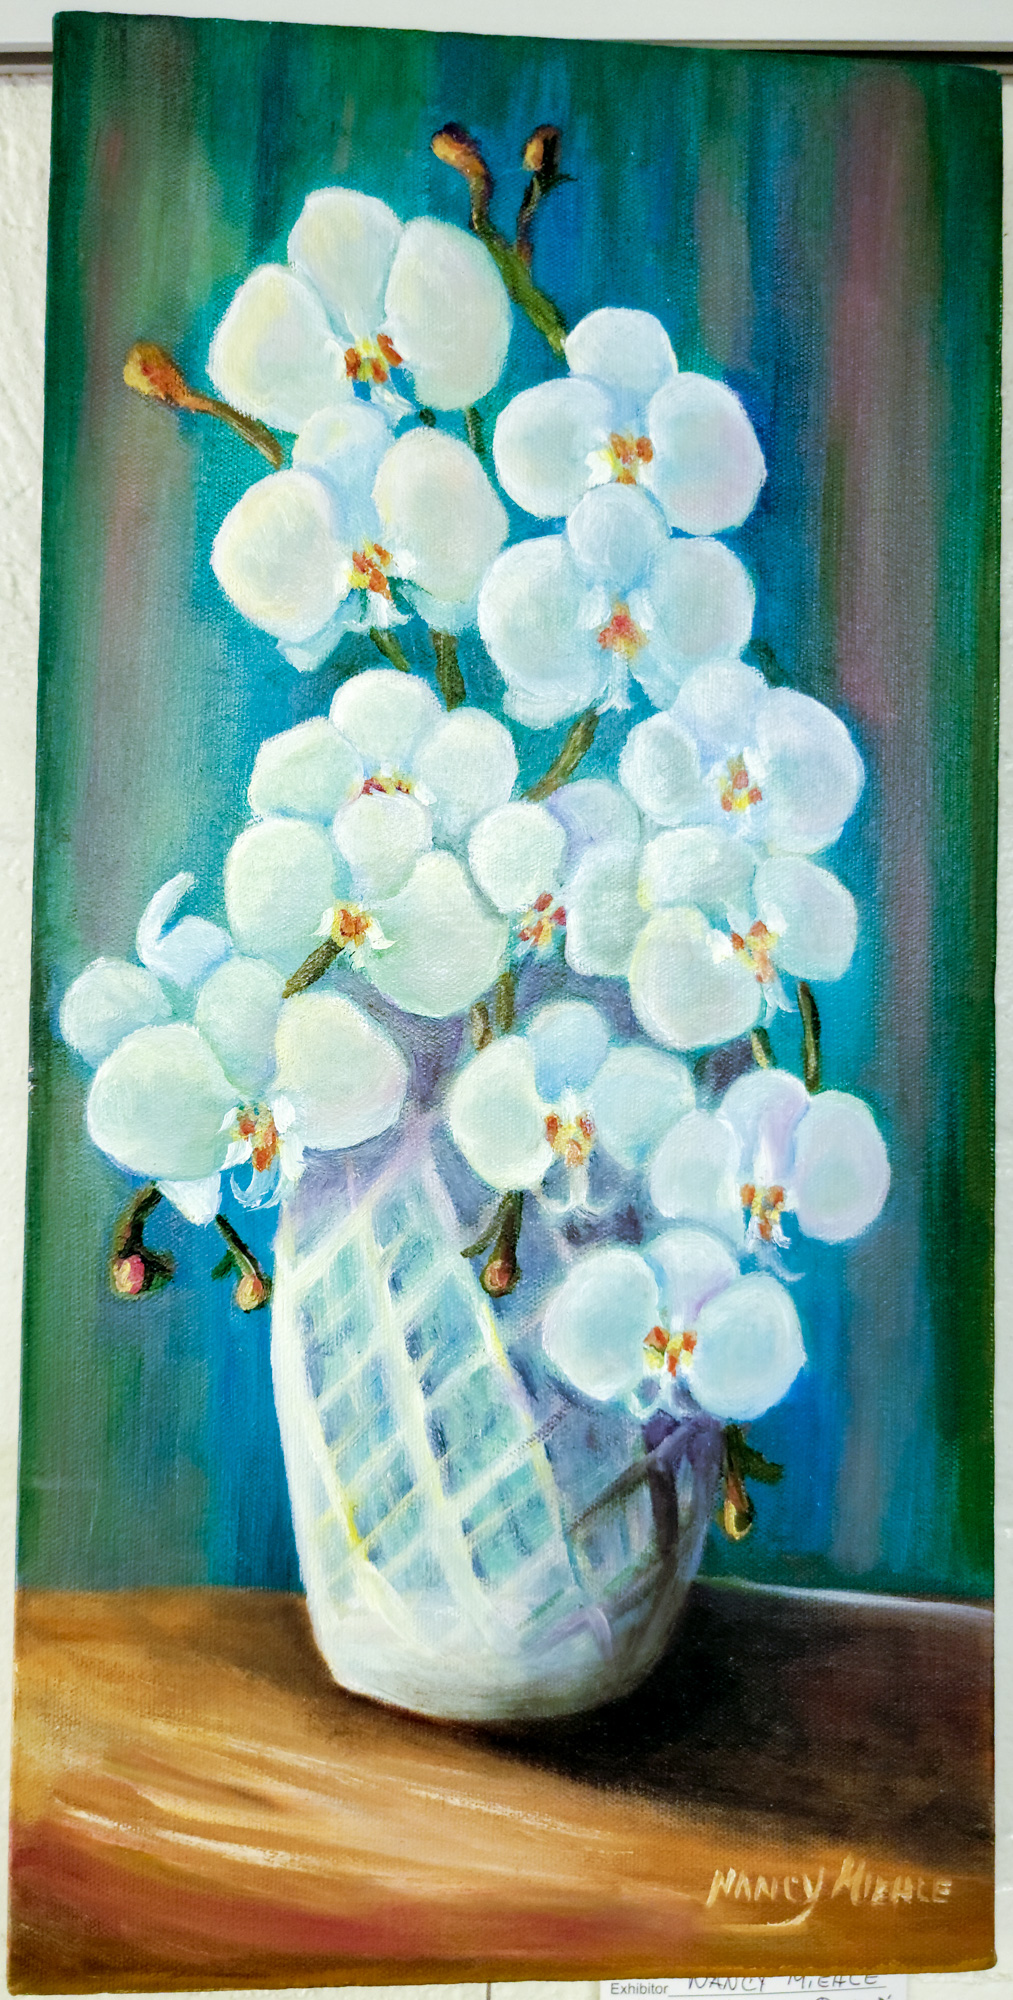 My Favorite Orchid by Nancy Miehle